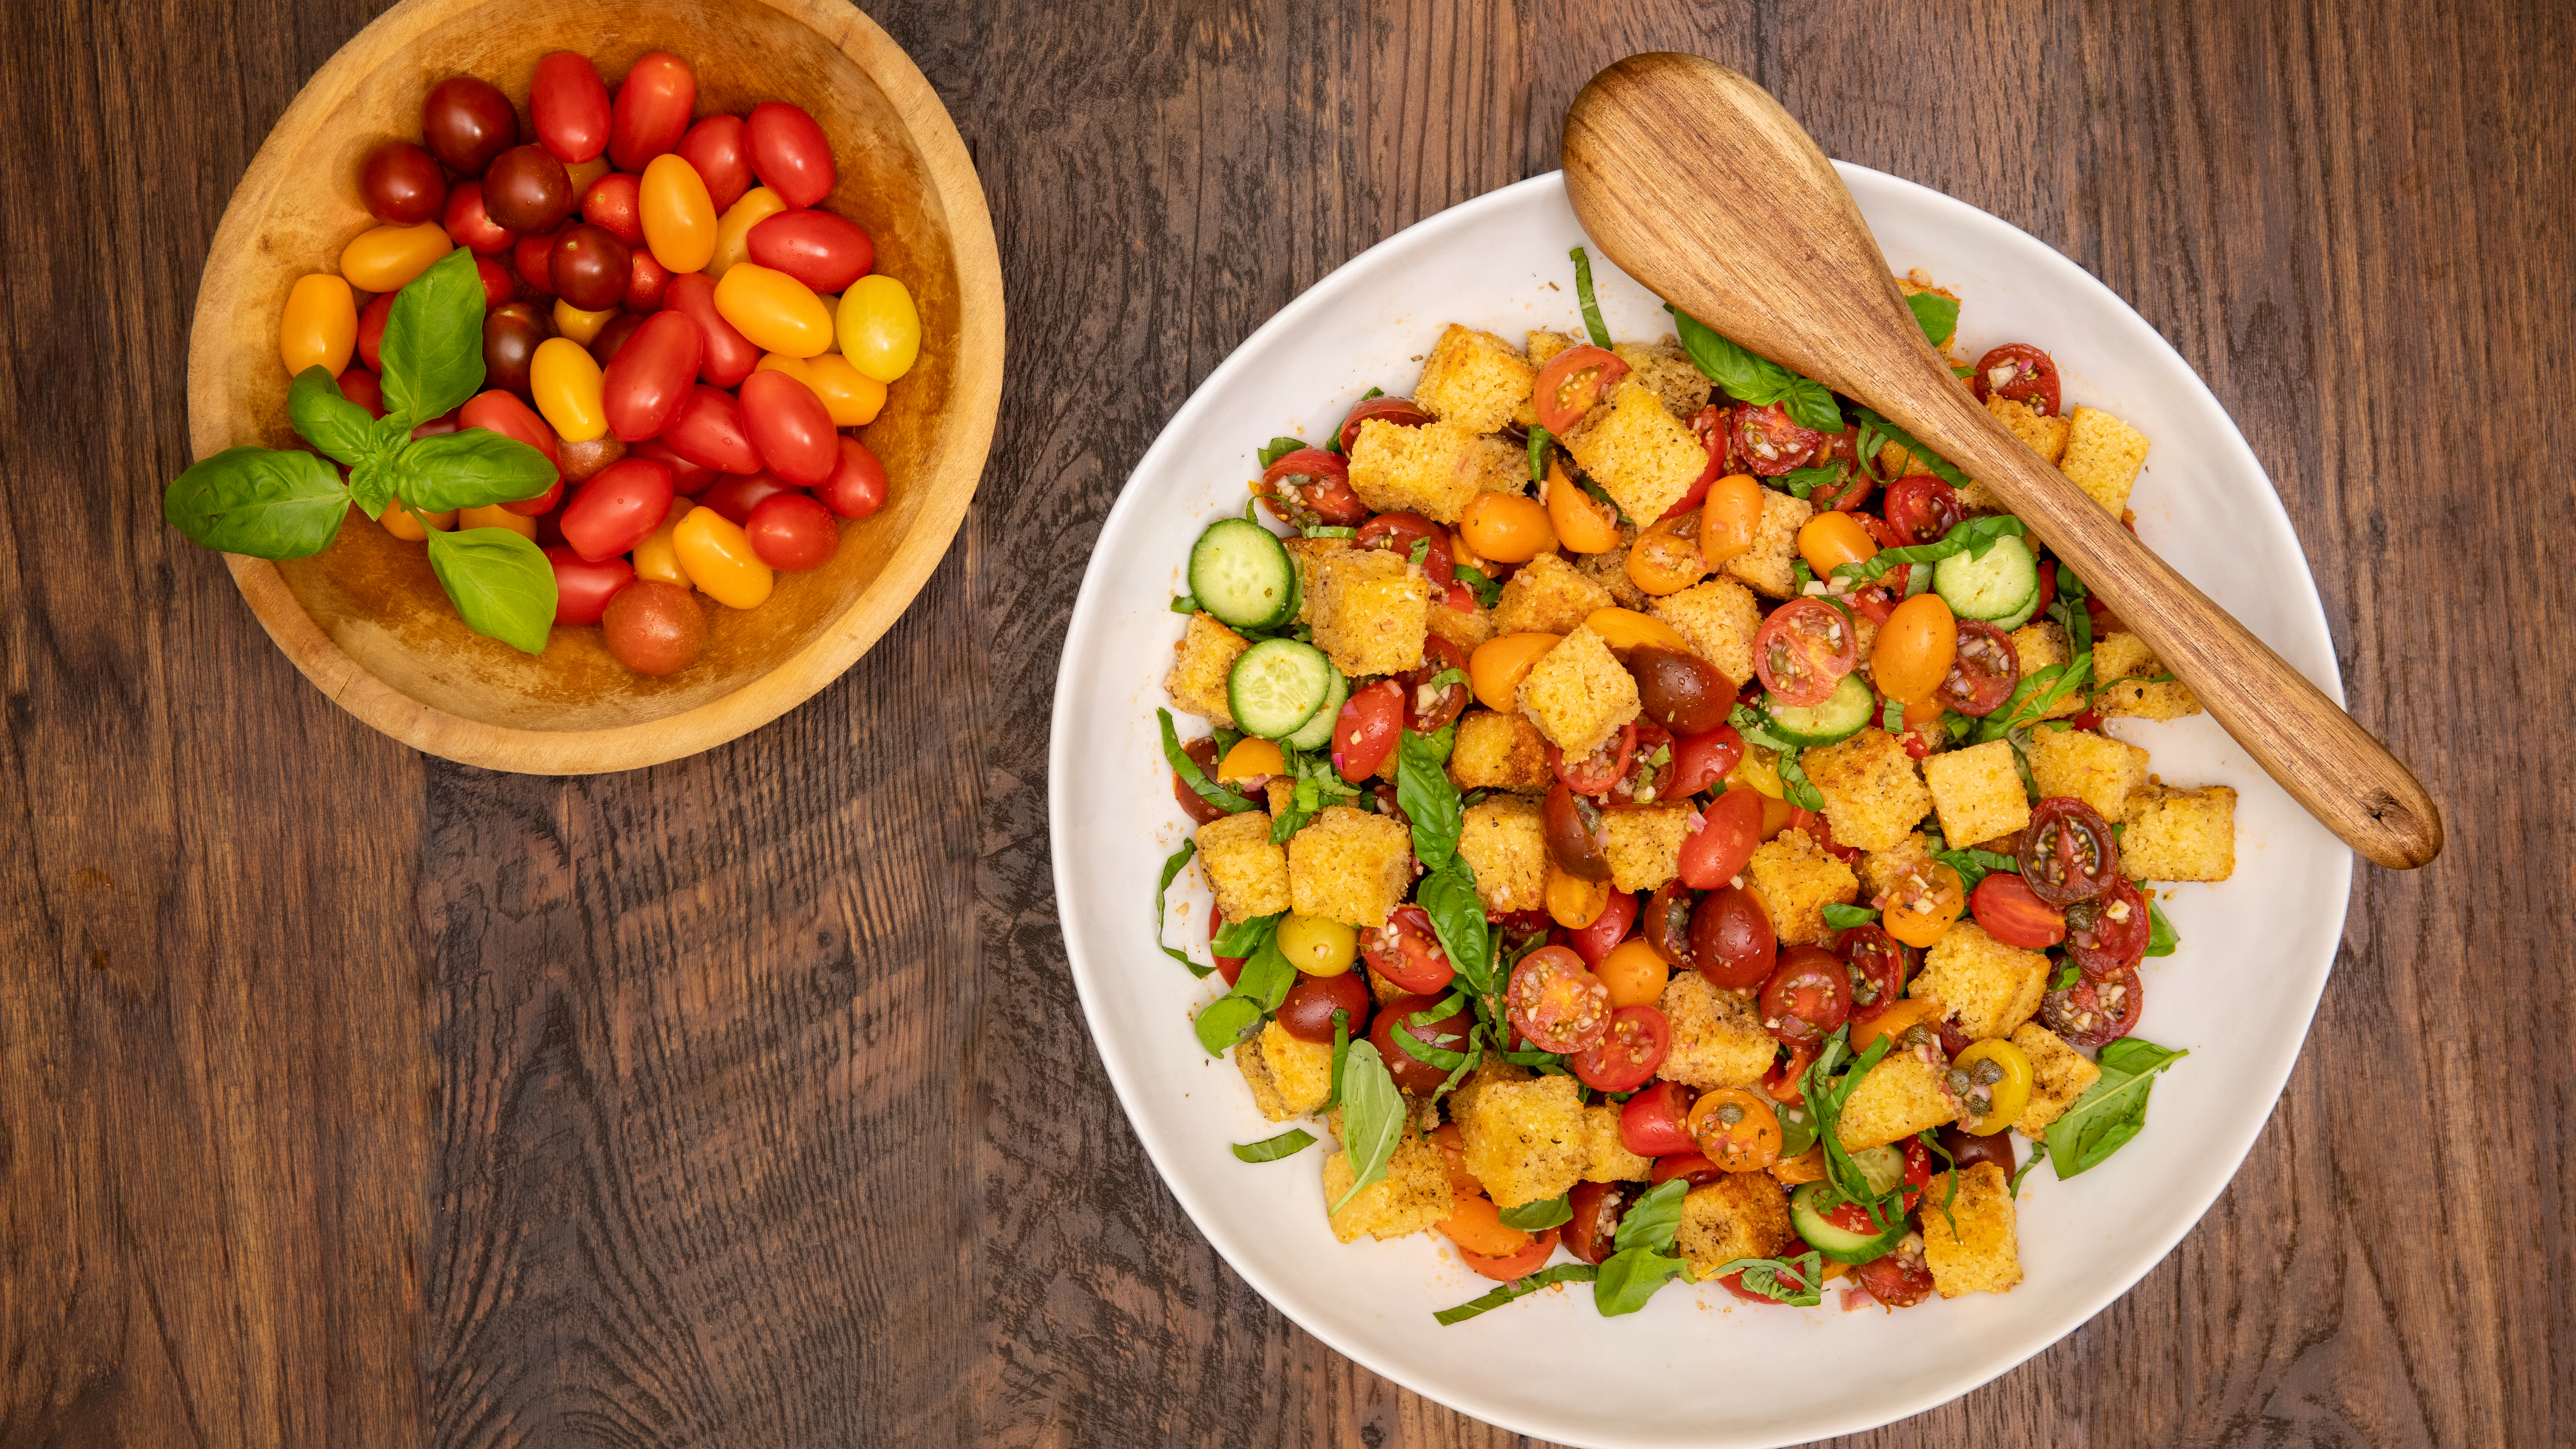 Cornbread panzanella - Download a zipped file of promotional materials in the Additional Assets section below.